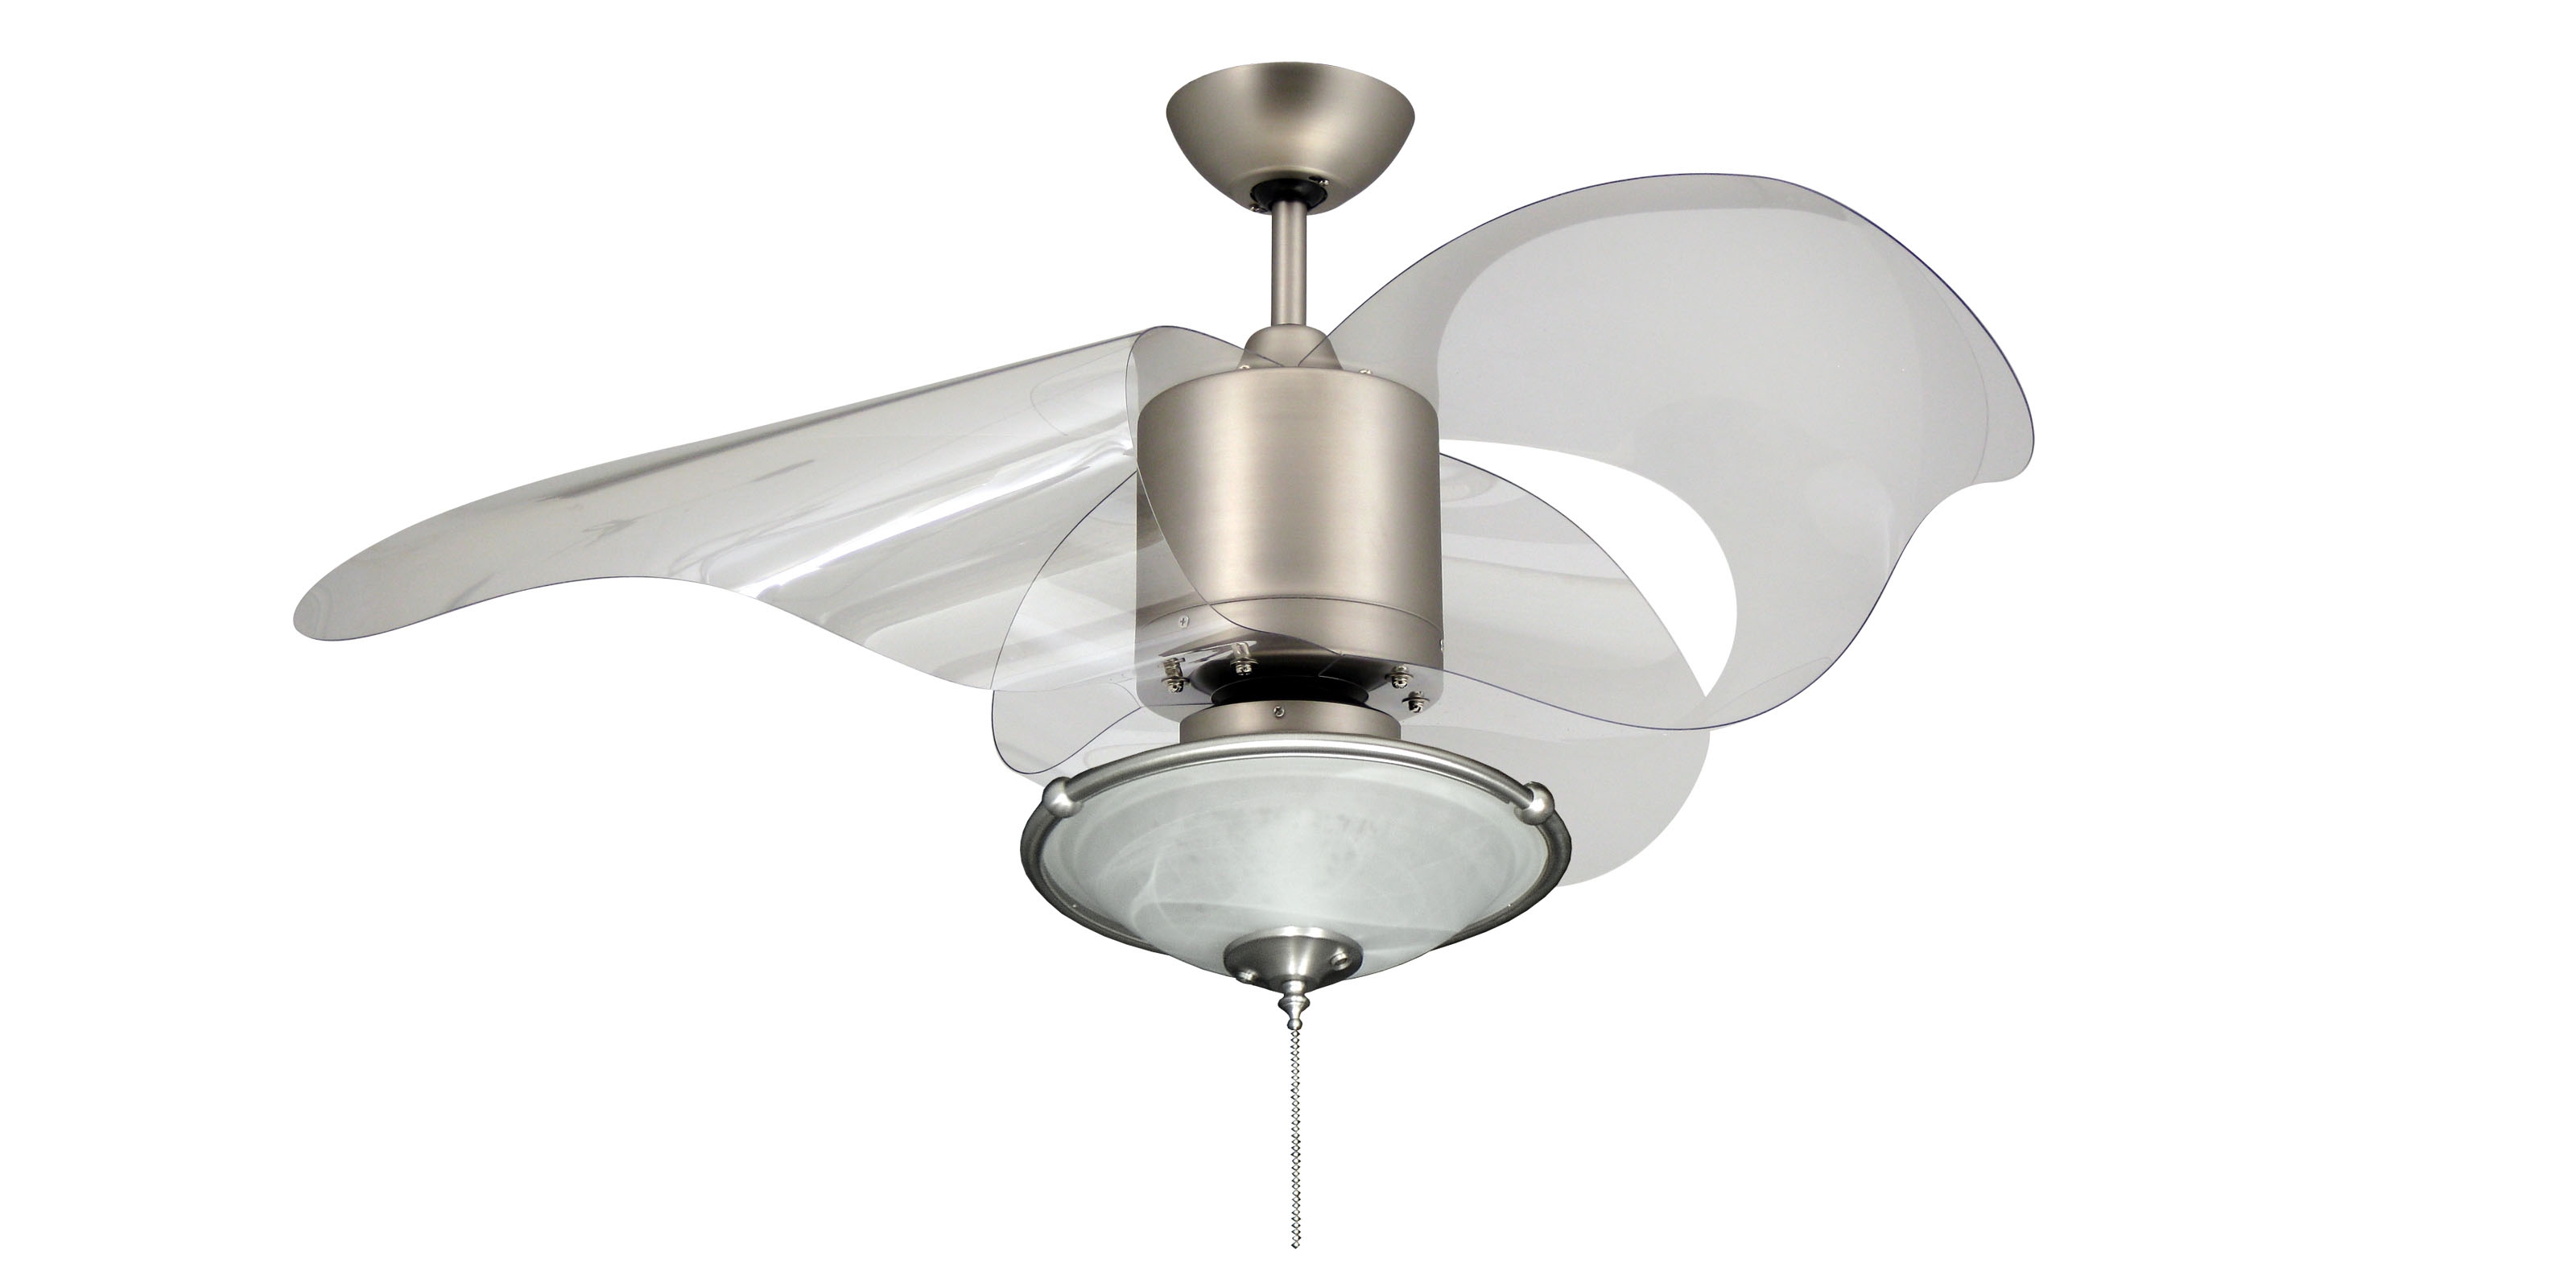 Unique Ceiling Fan Light Fixturesawesome cool ceiling fans with lights 64 for your low profile